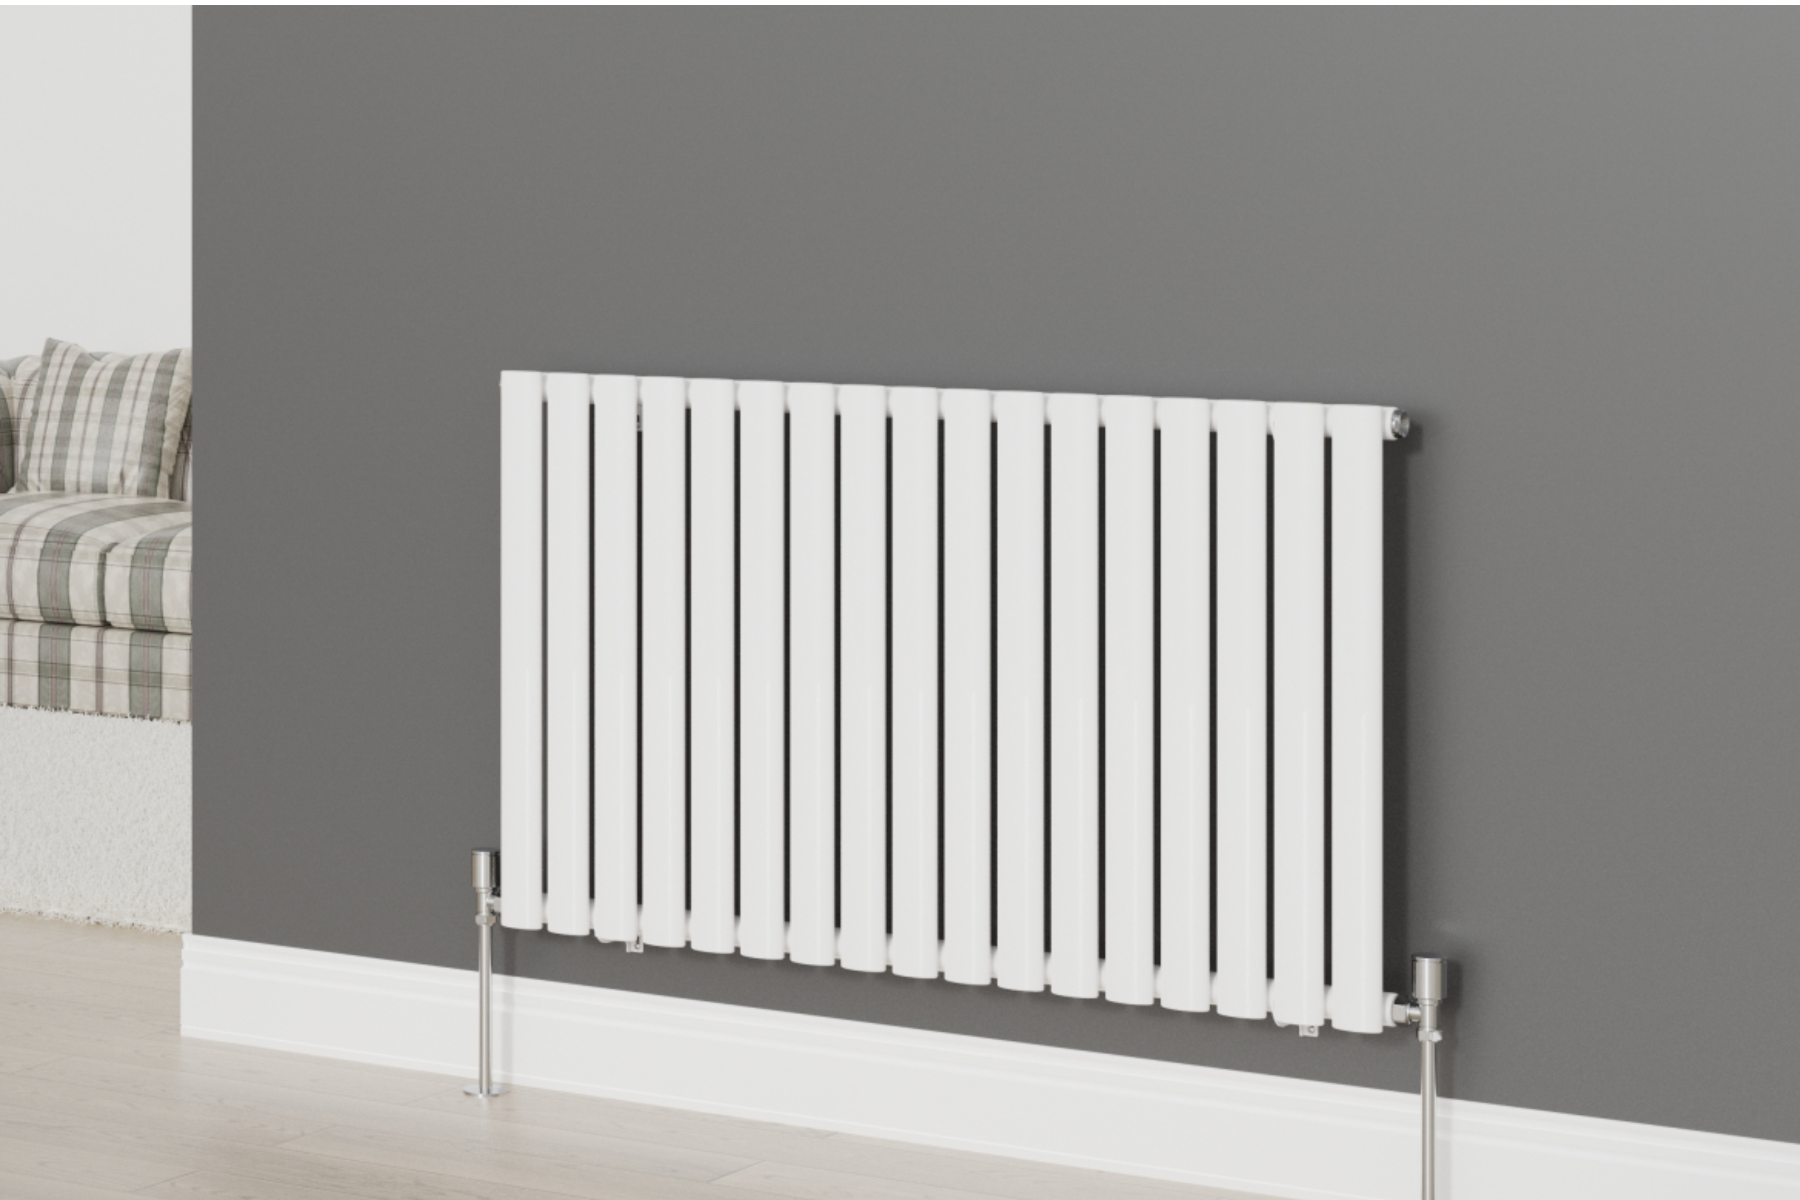 White Radiator Infront Of Grey Wall In House Setting